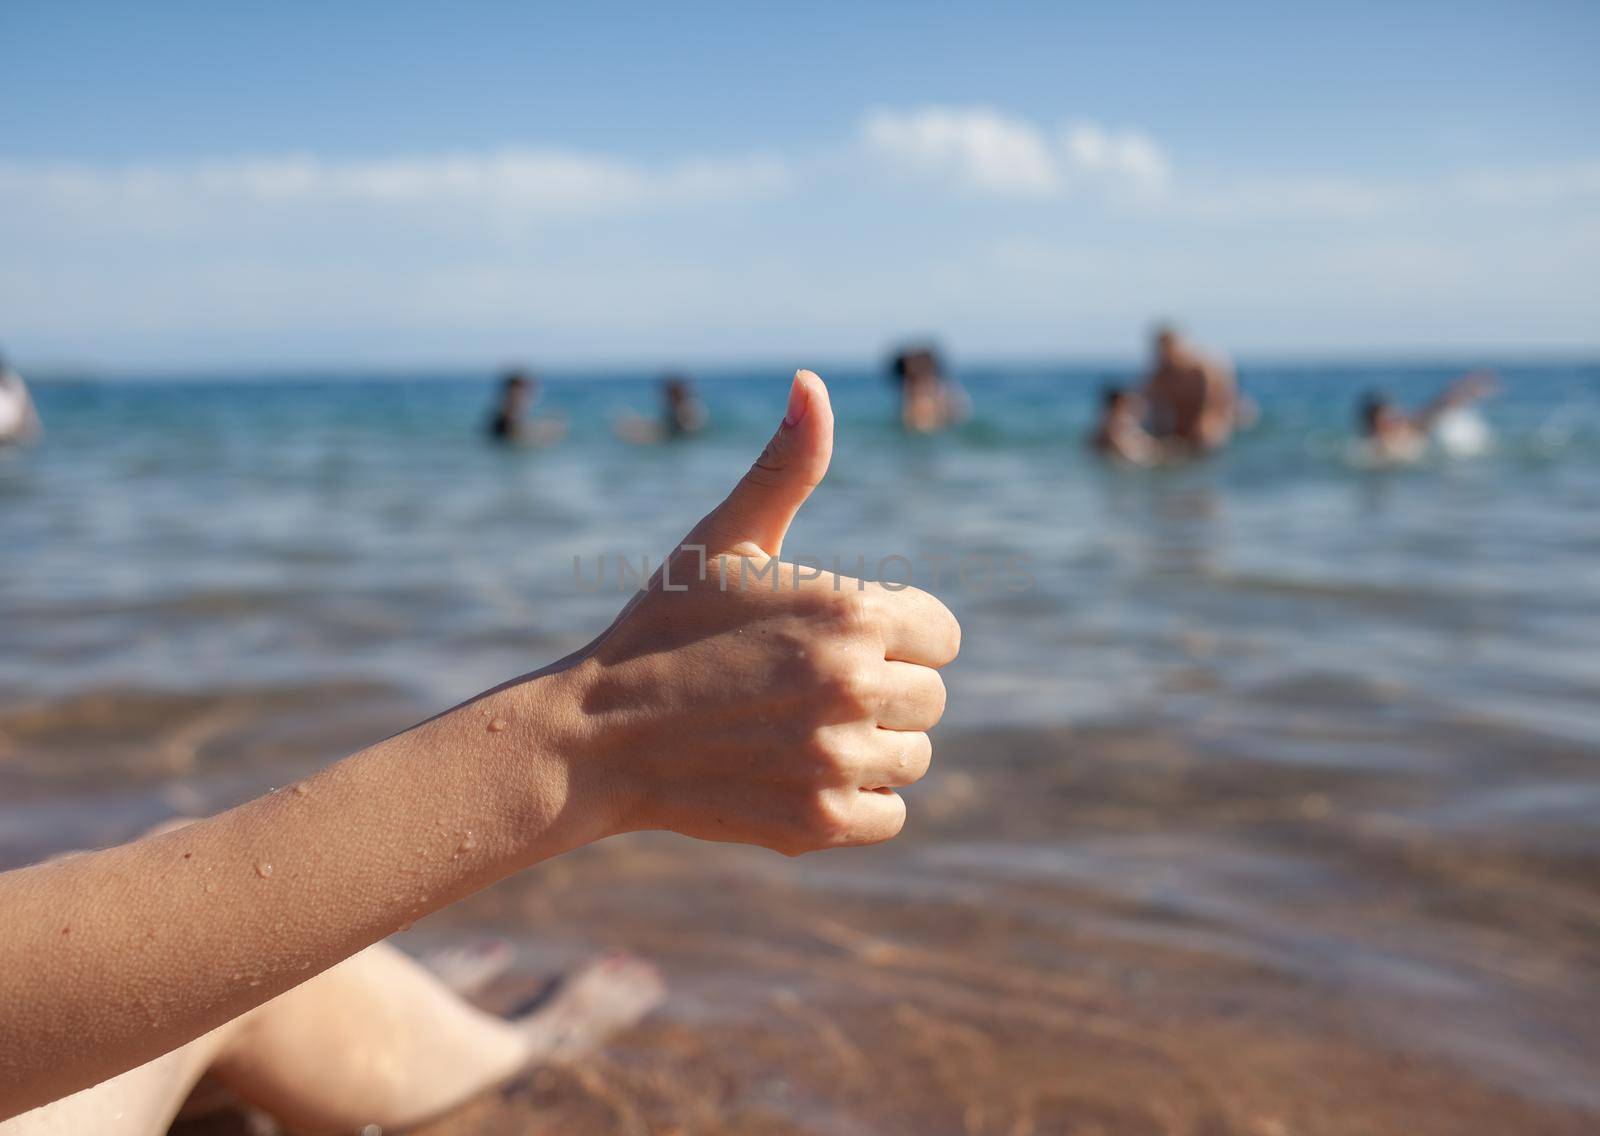 Female hand thumbs up on sea and sky background closeup. Woman showing ok sign on shoreline coastline. Body language, communication concept. Holiday, vacation, summer is coming conceptual photo.